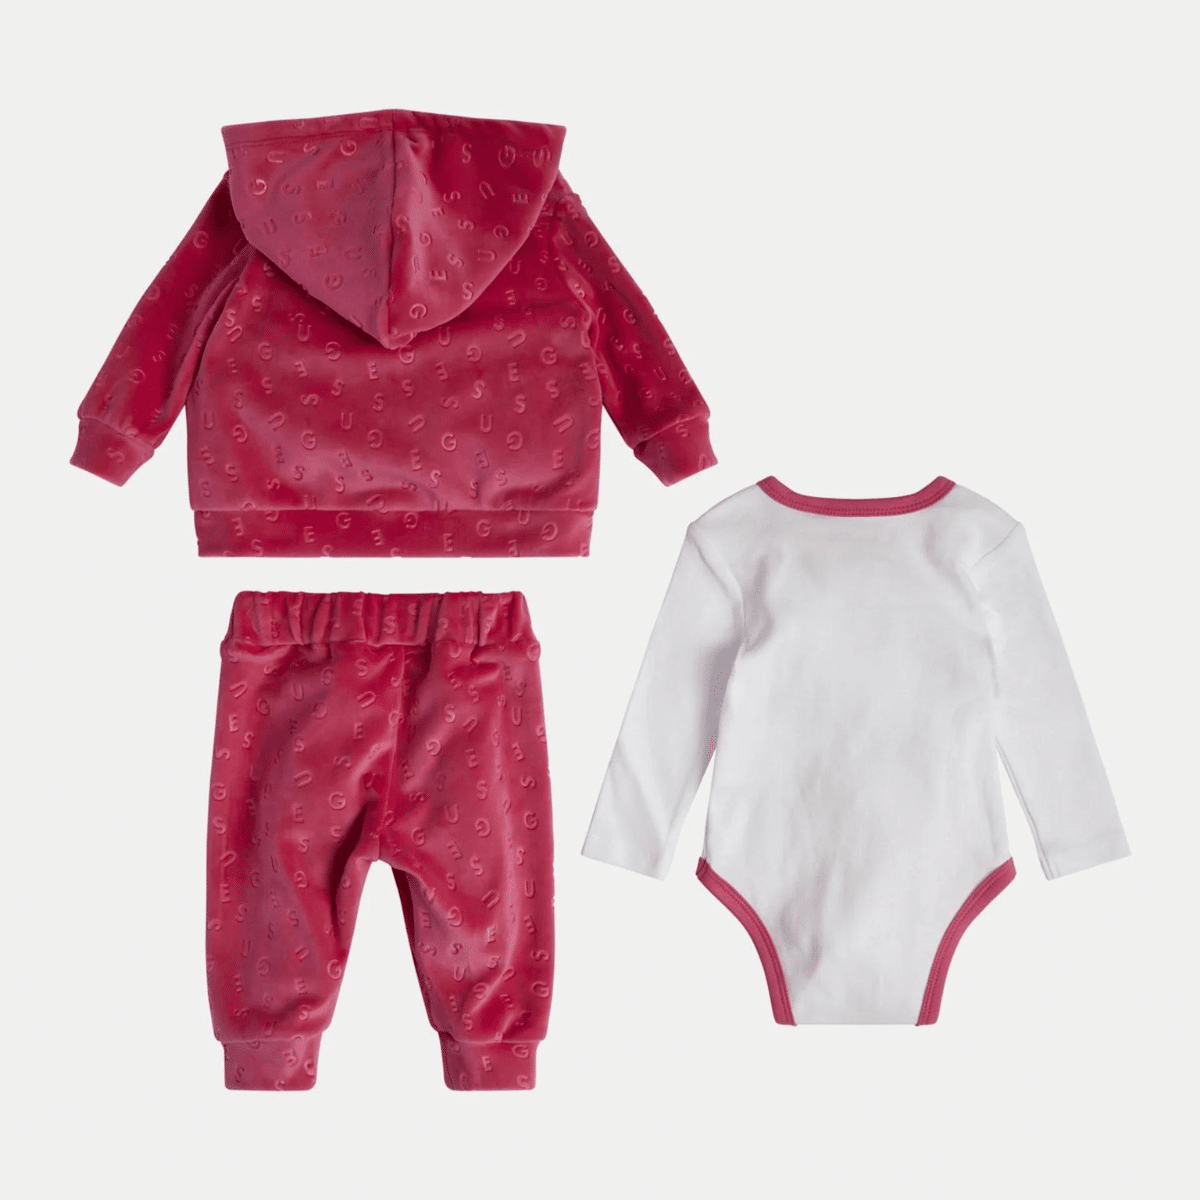 Guess girls baby red outfit back view